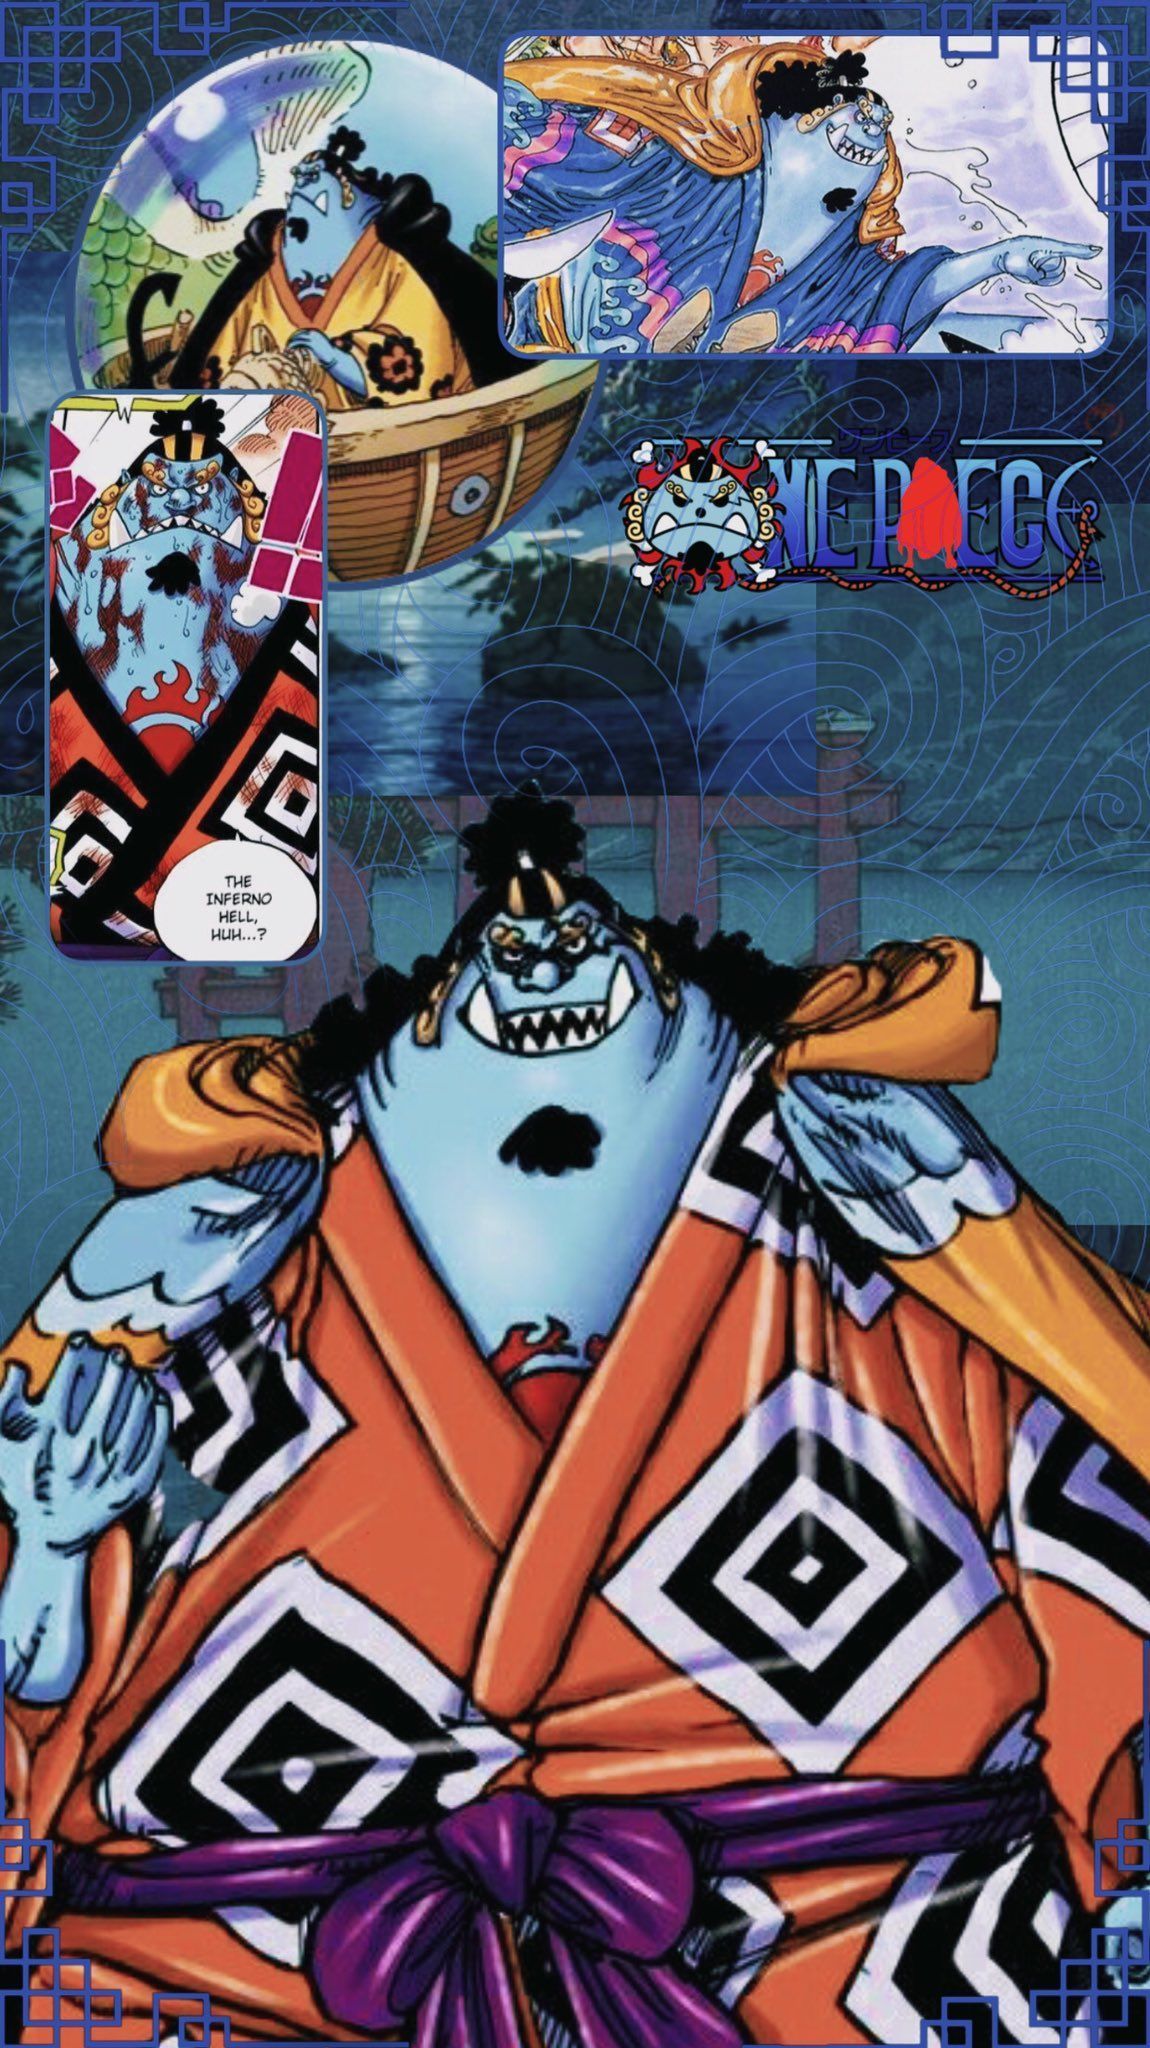 One Piece chapter 975 - Kaido's past as a rubber man - One Piece